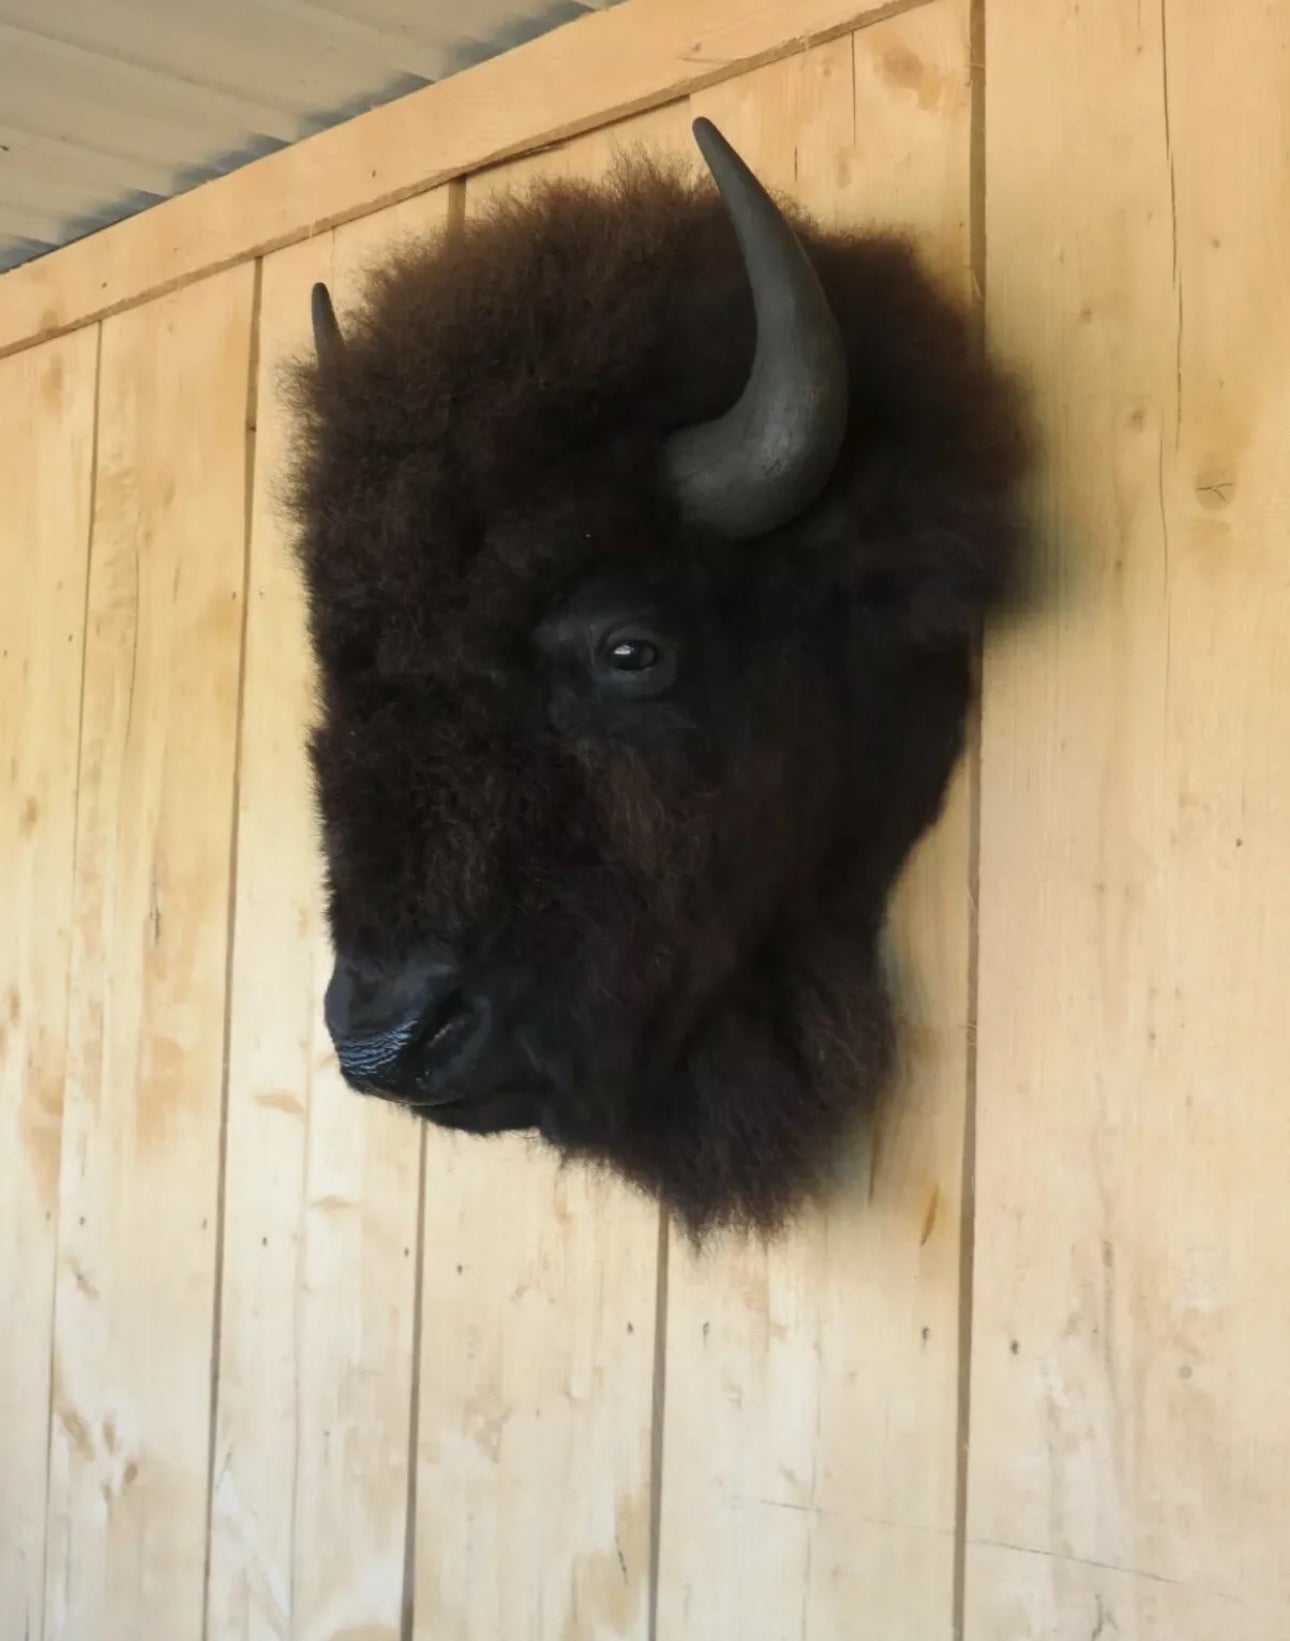 Real Buffalo / Bison neck Head Taxidermy Mount New